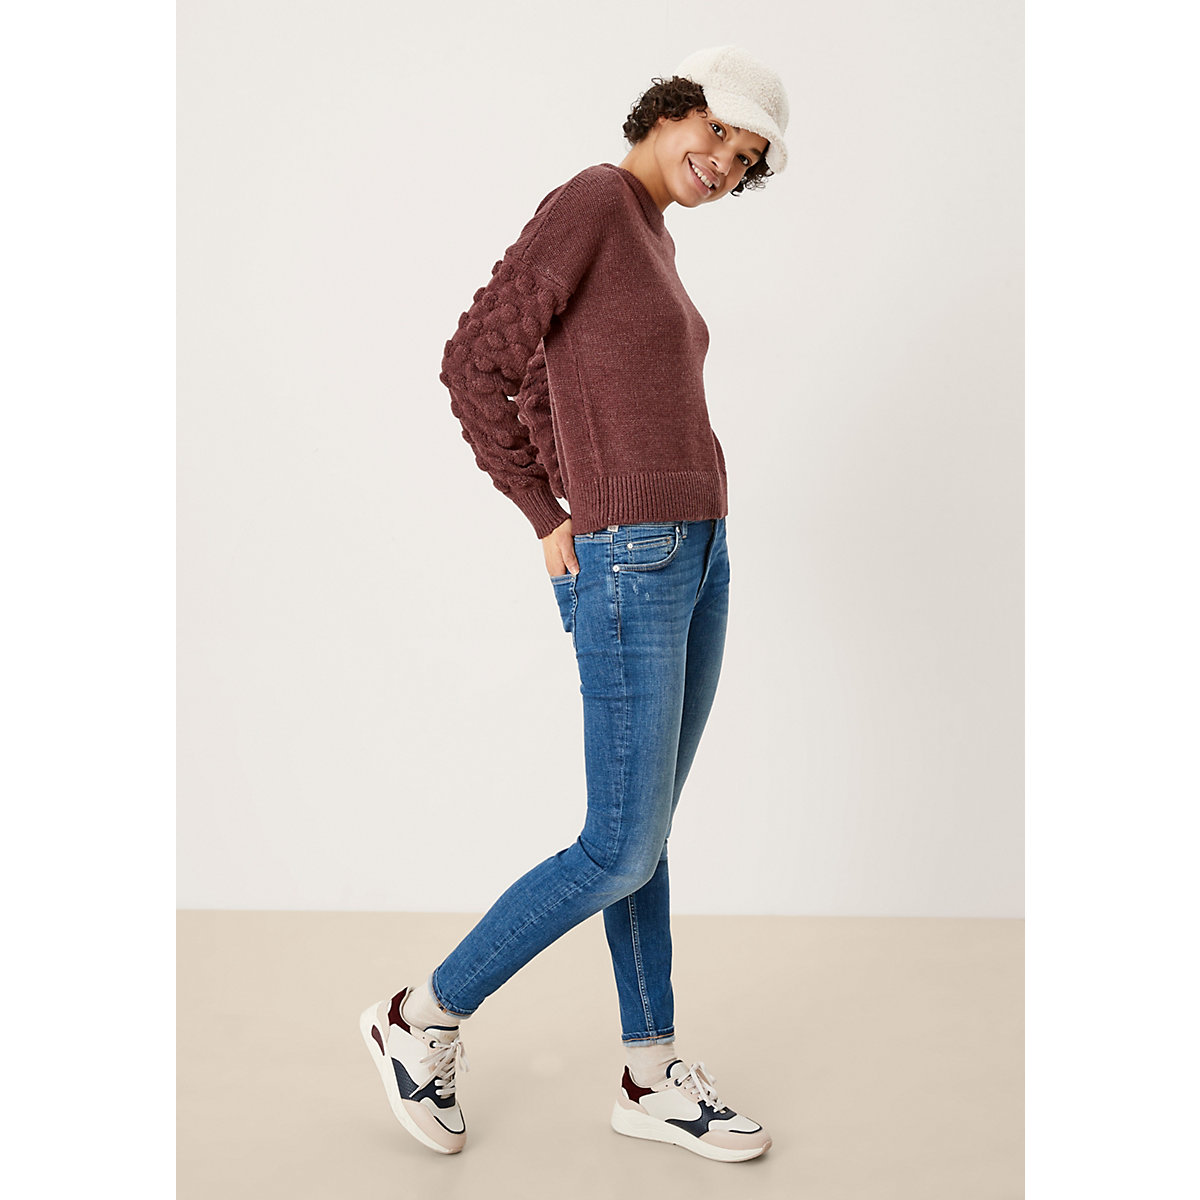 QS by s.Oliver Pullover mit Strukturmuster Pullover rot